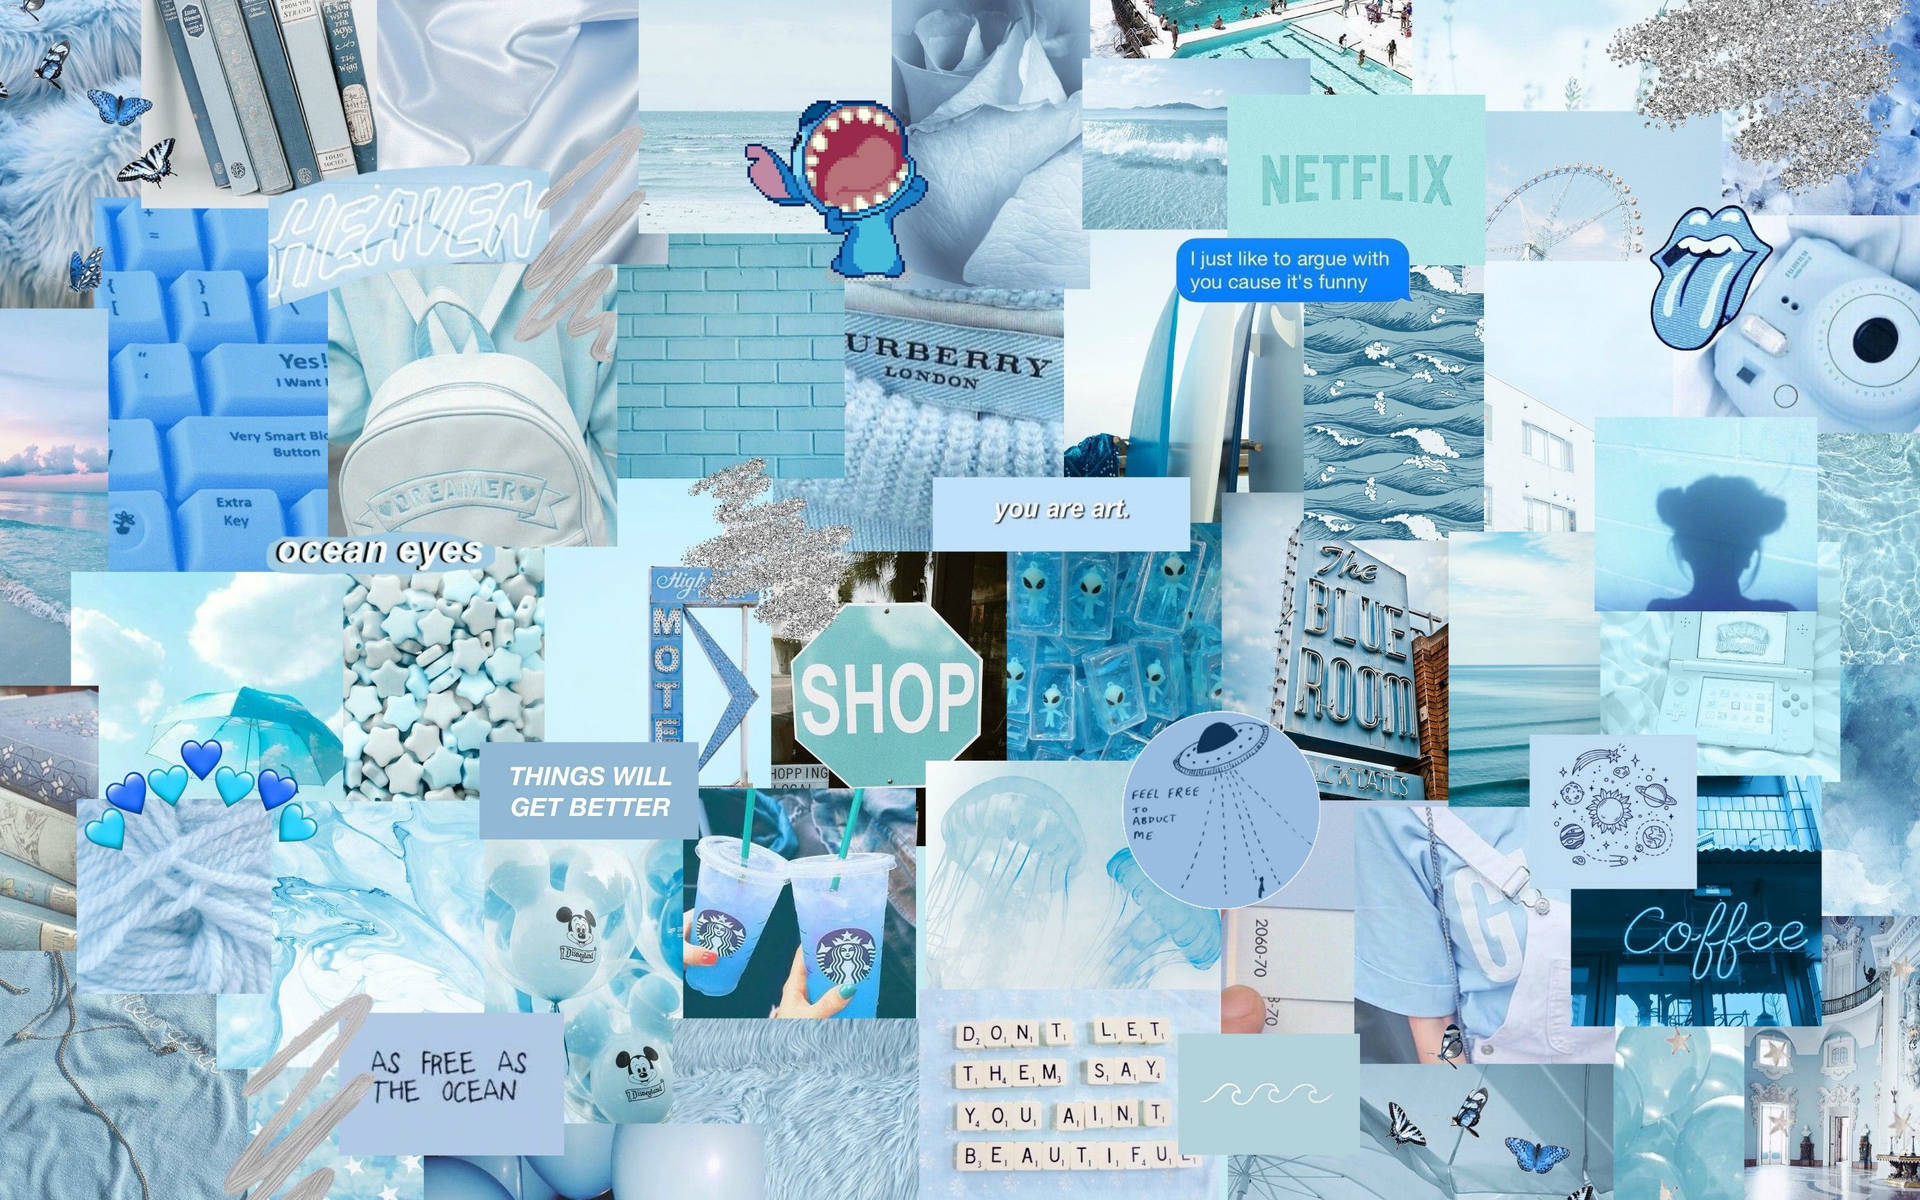 Take a break and immerse in the calming blue aesthetic. Wallpaper